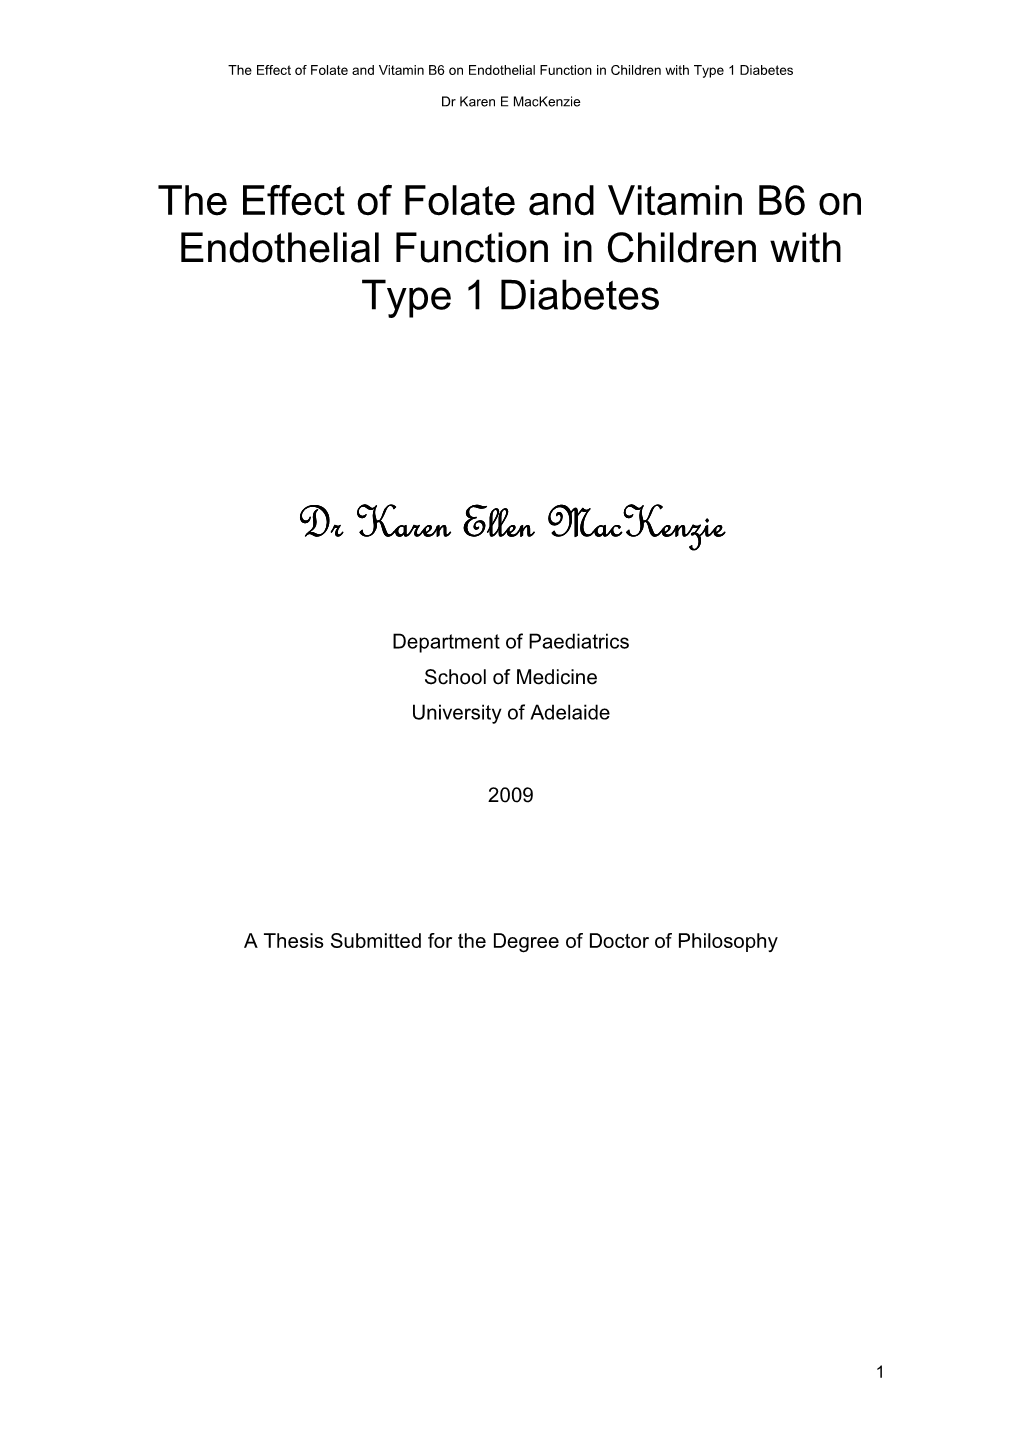 The Effect of Folate and Vitamin B6 on Endothelial Function in Children with Type 1 Diabetes